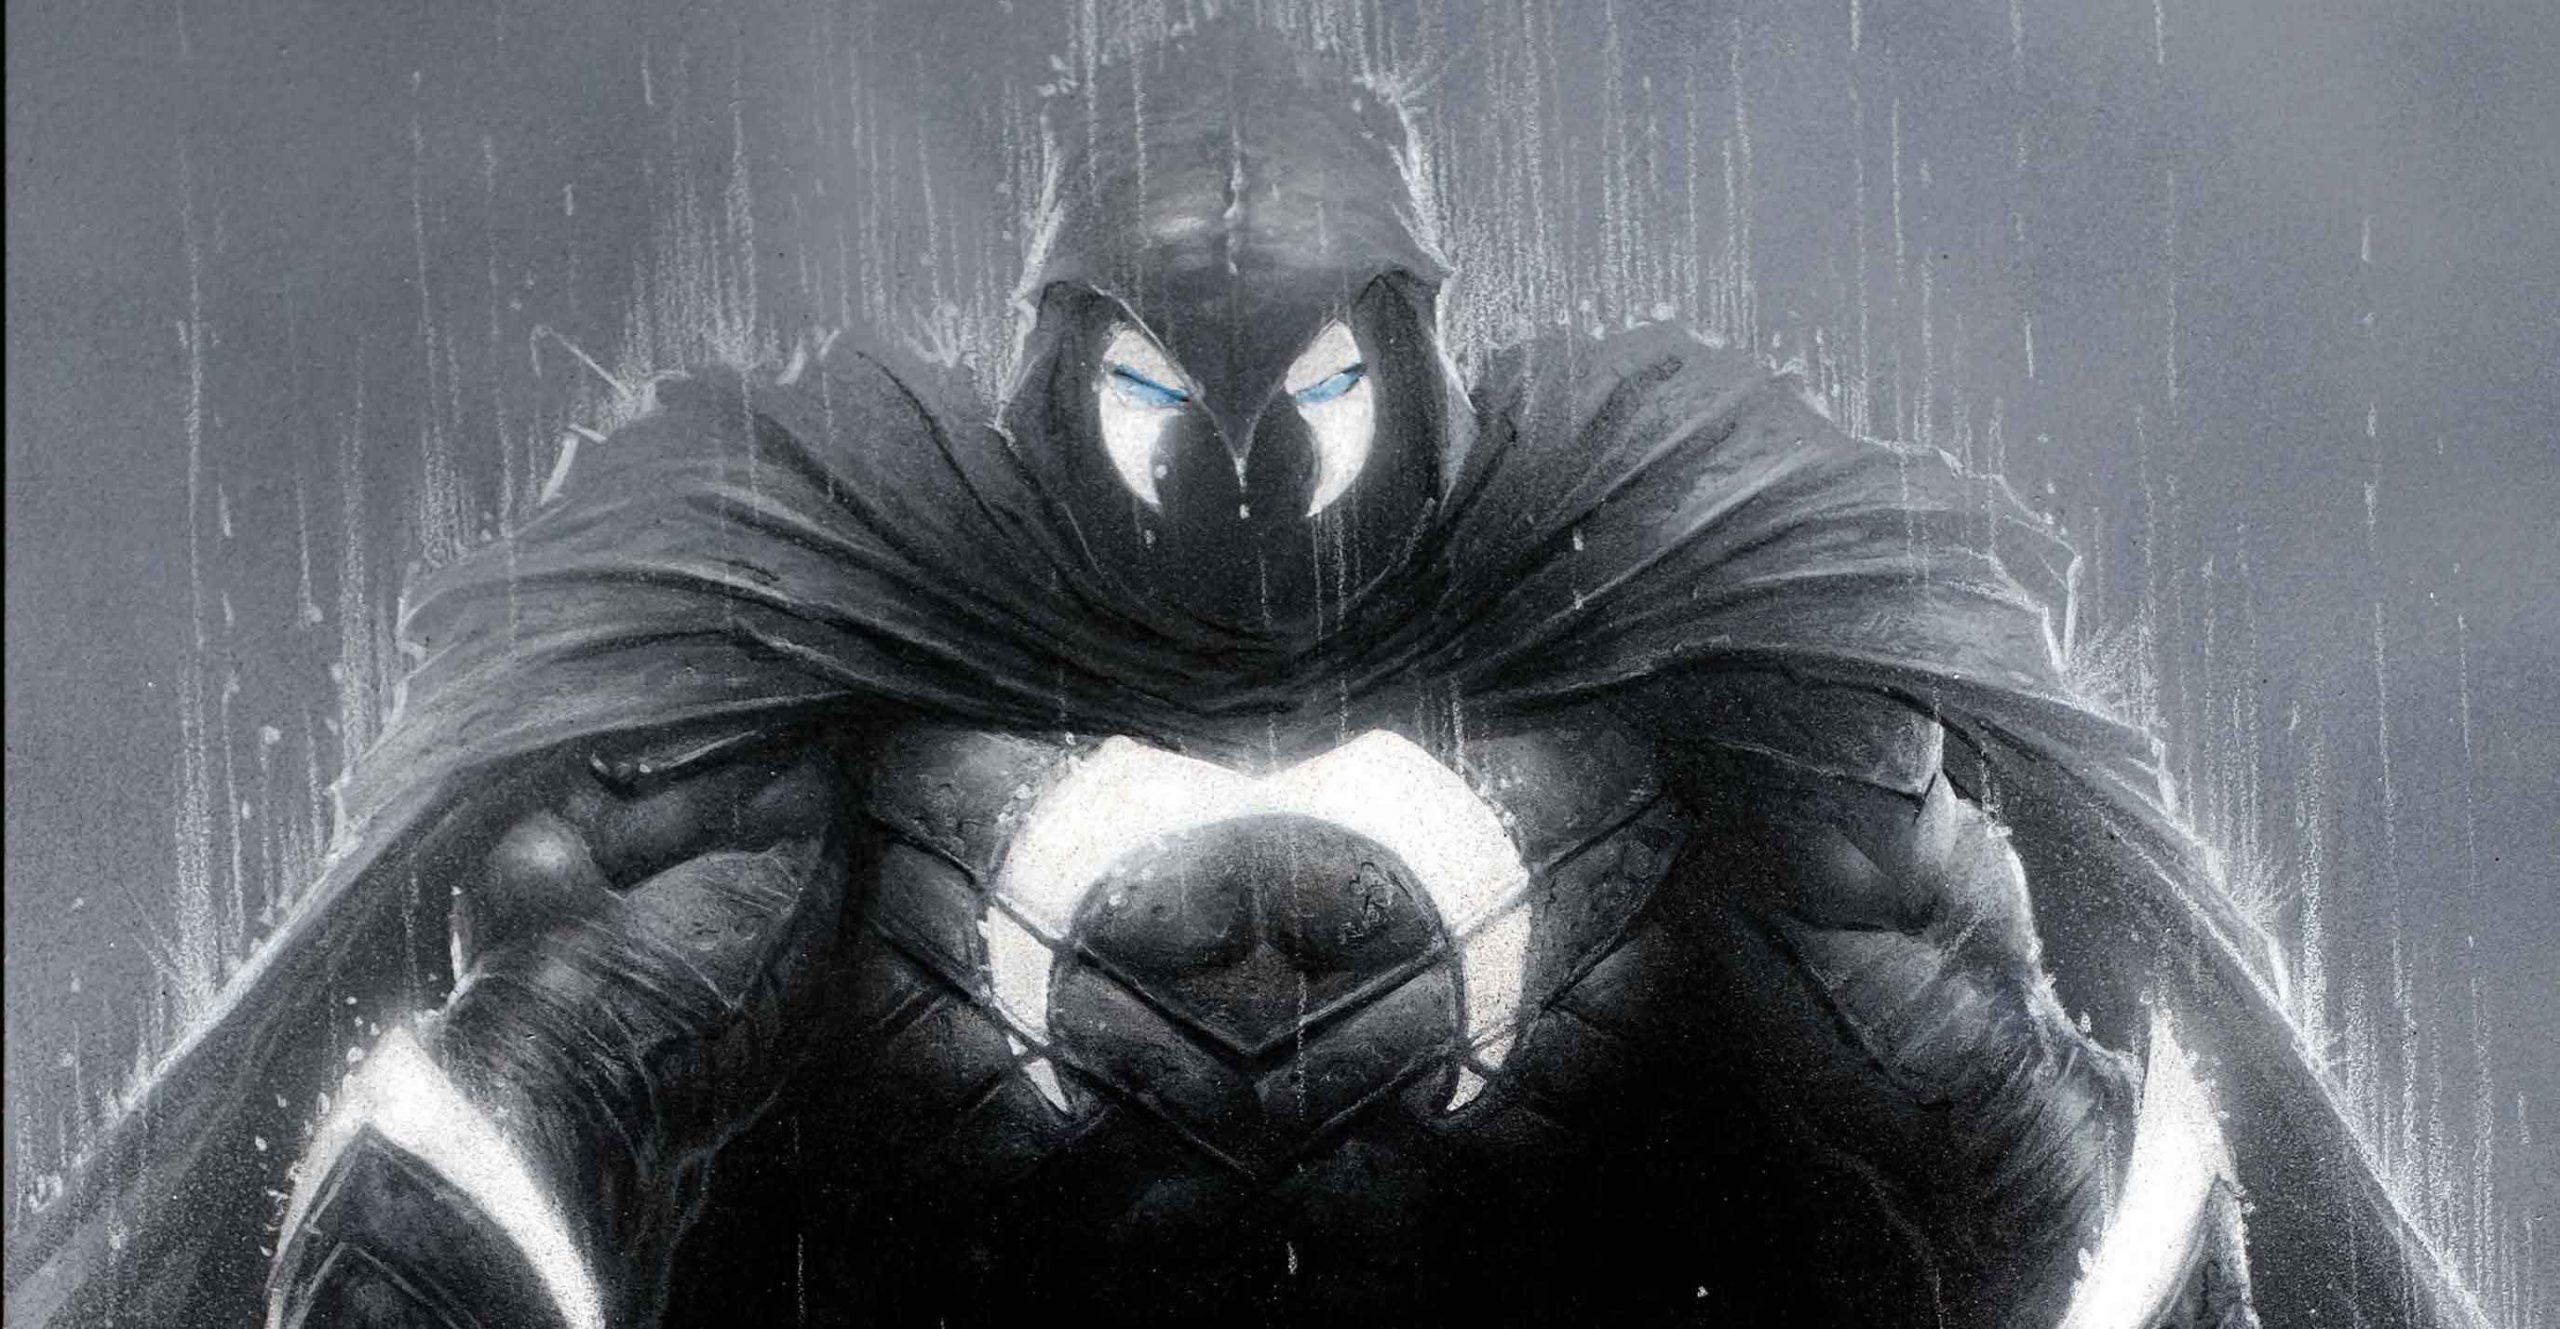 'Vengeance of the Moon Knight' #1 will have you on the edge of your seat